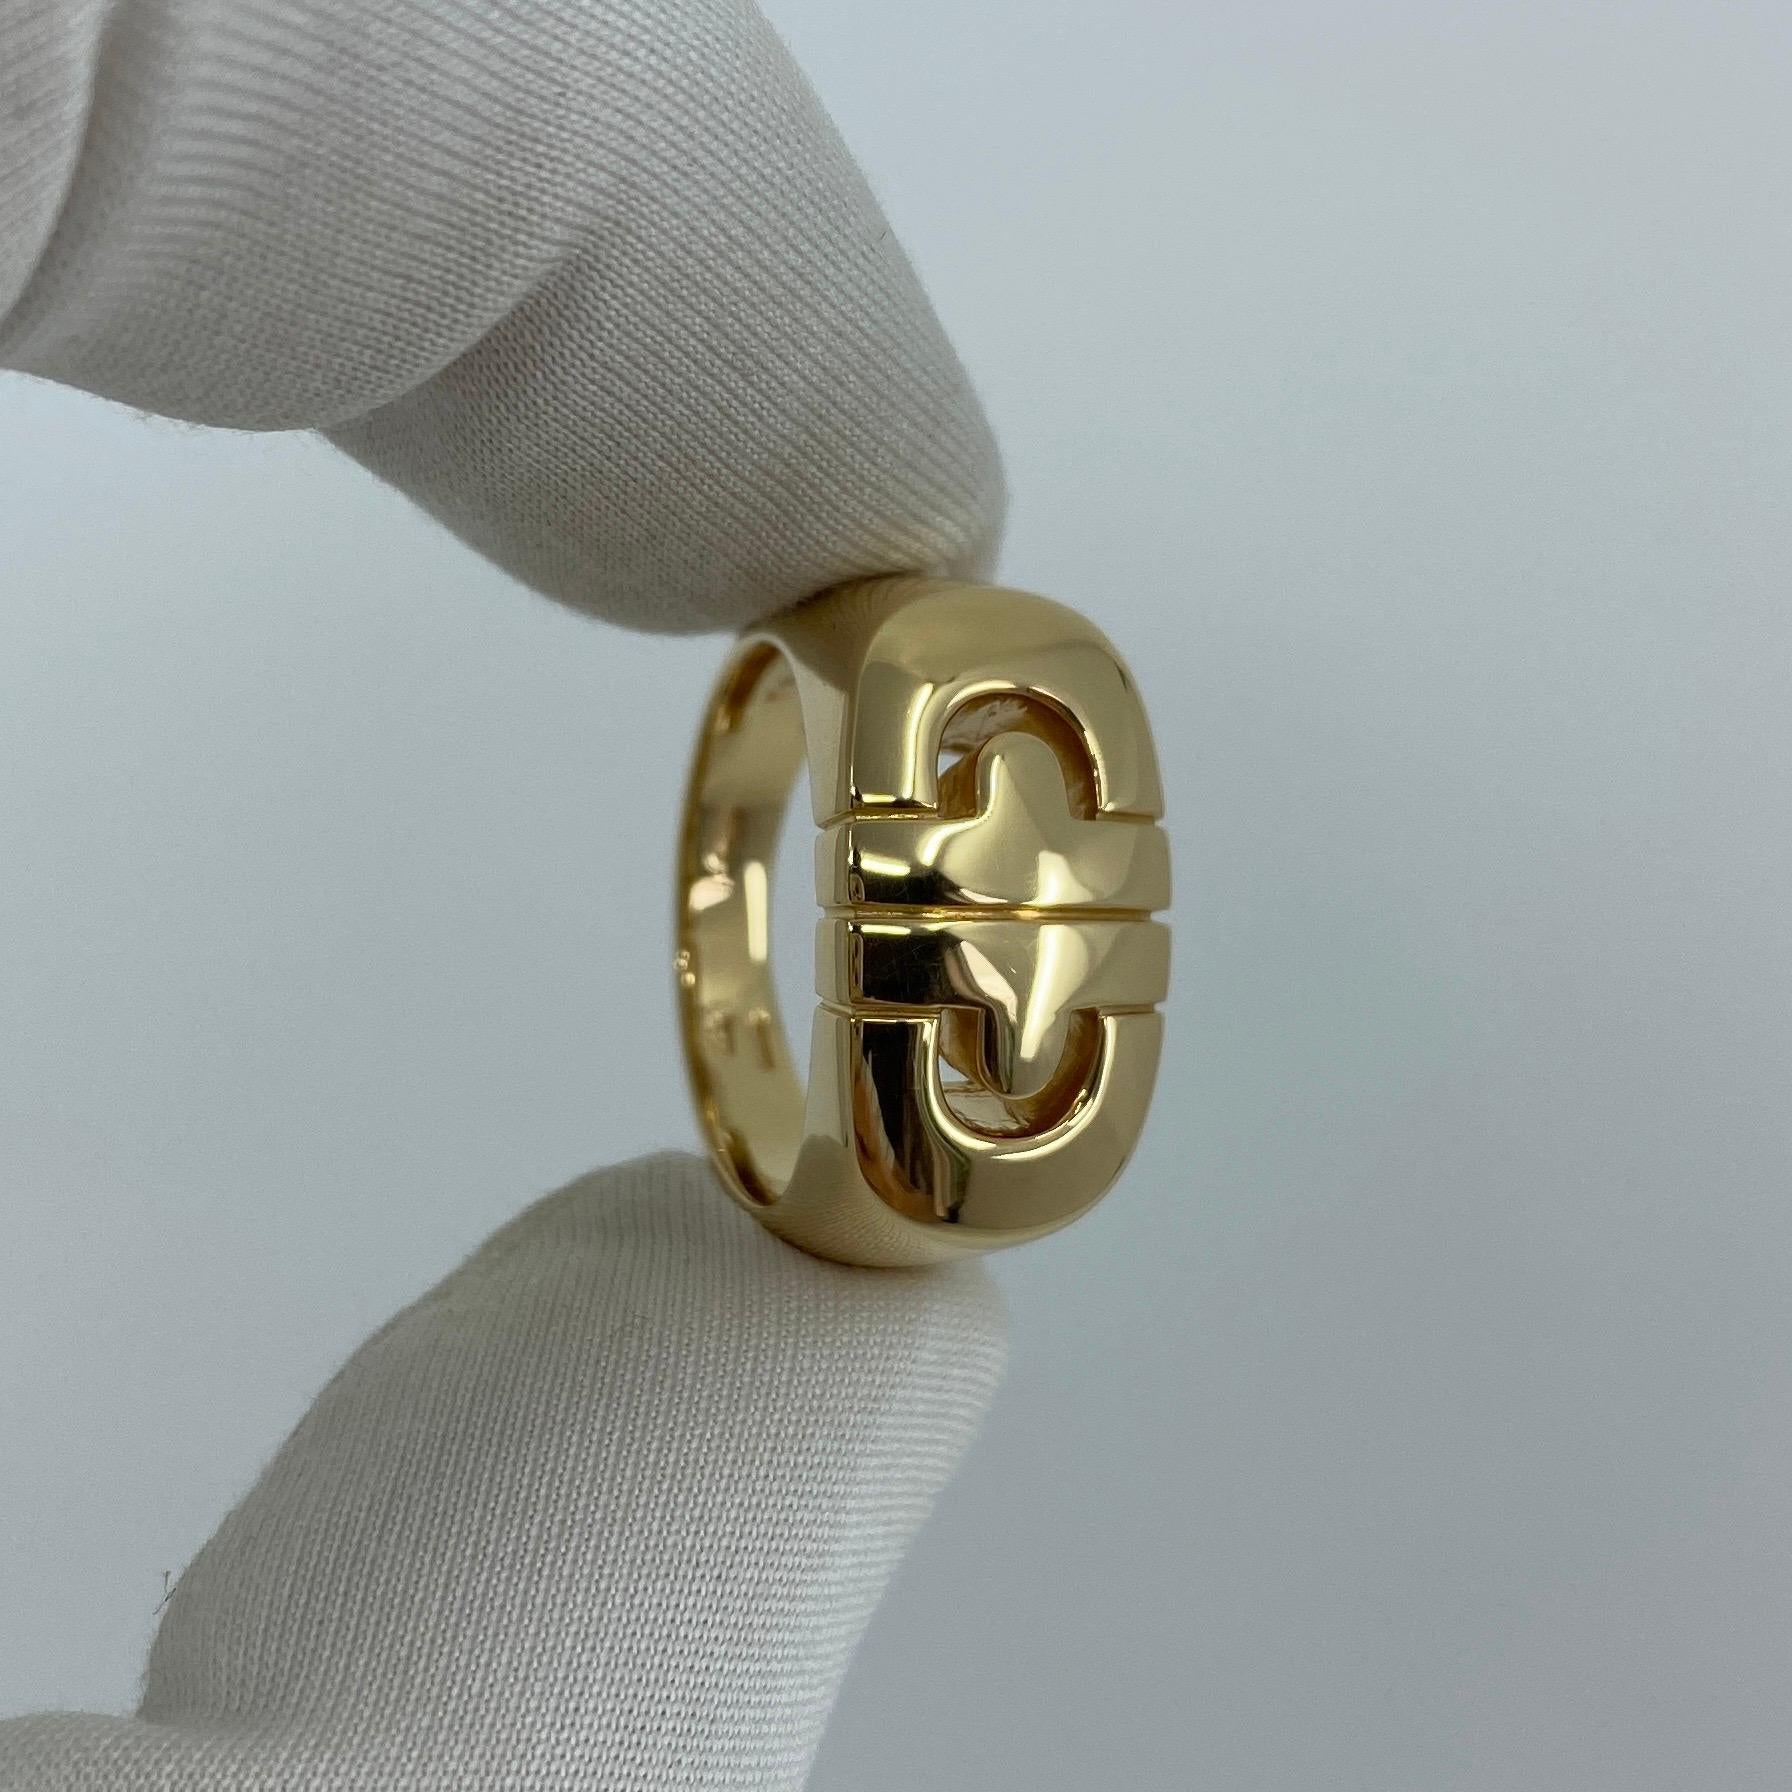 Bvlgari Parentesi 18 Karat Yellow Gold 'Signet Style' Italian Ring.

A beautiful vintage 18k yellow gold ring with iconic Bvlgari parentesi design.

Ring size: UK M - US 6.5
Ring sizing is possible.

This ring has been professionally polished and